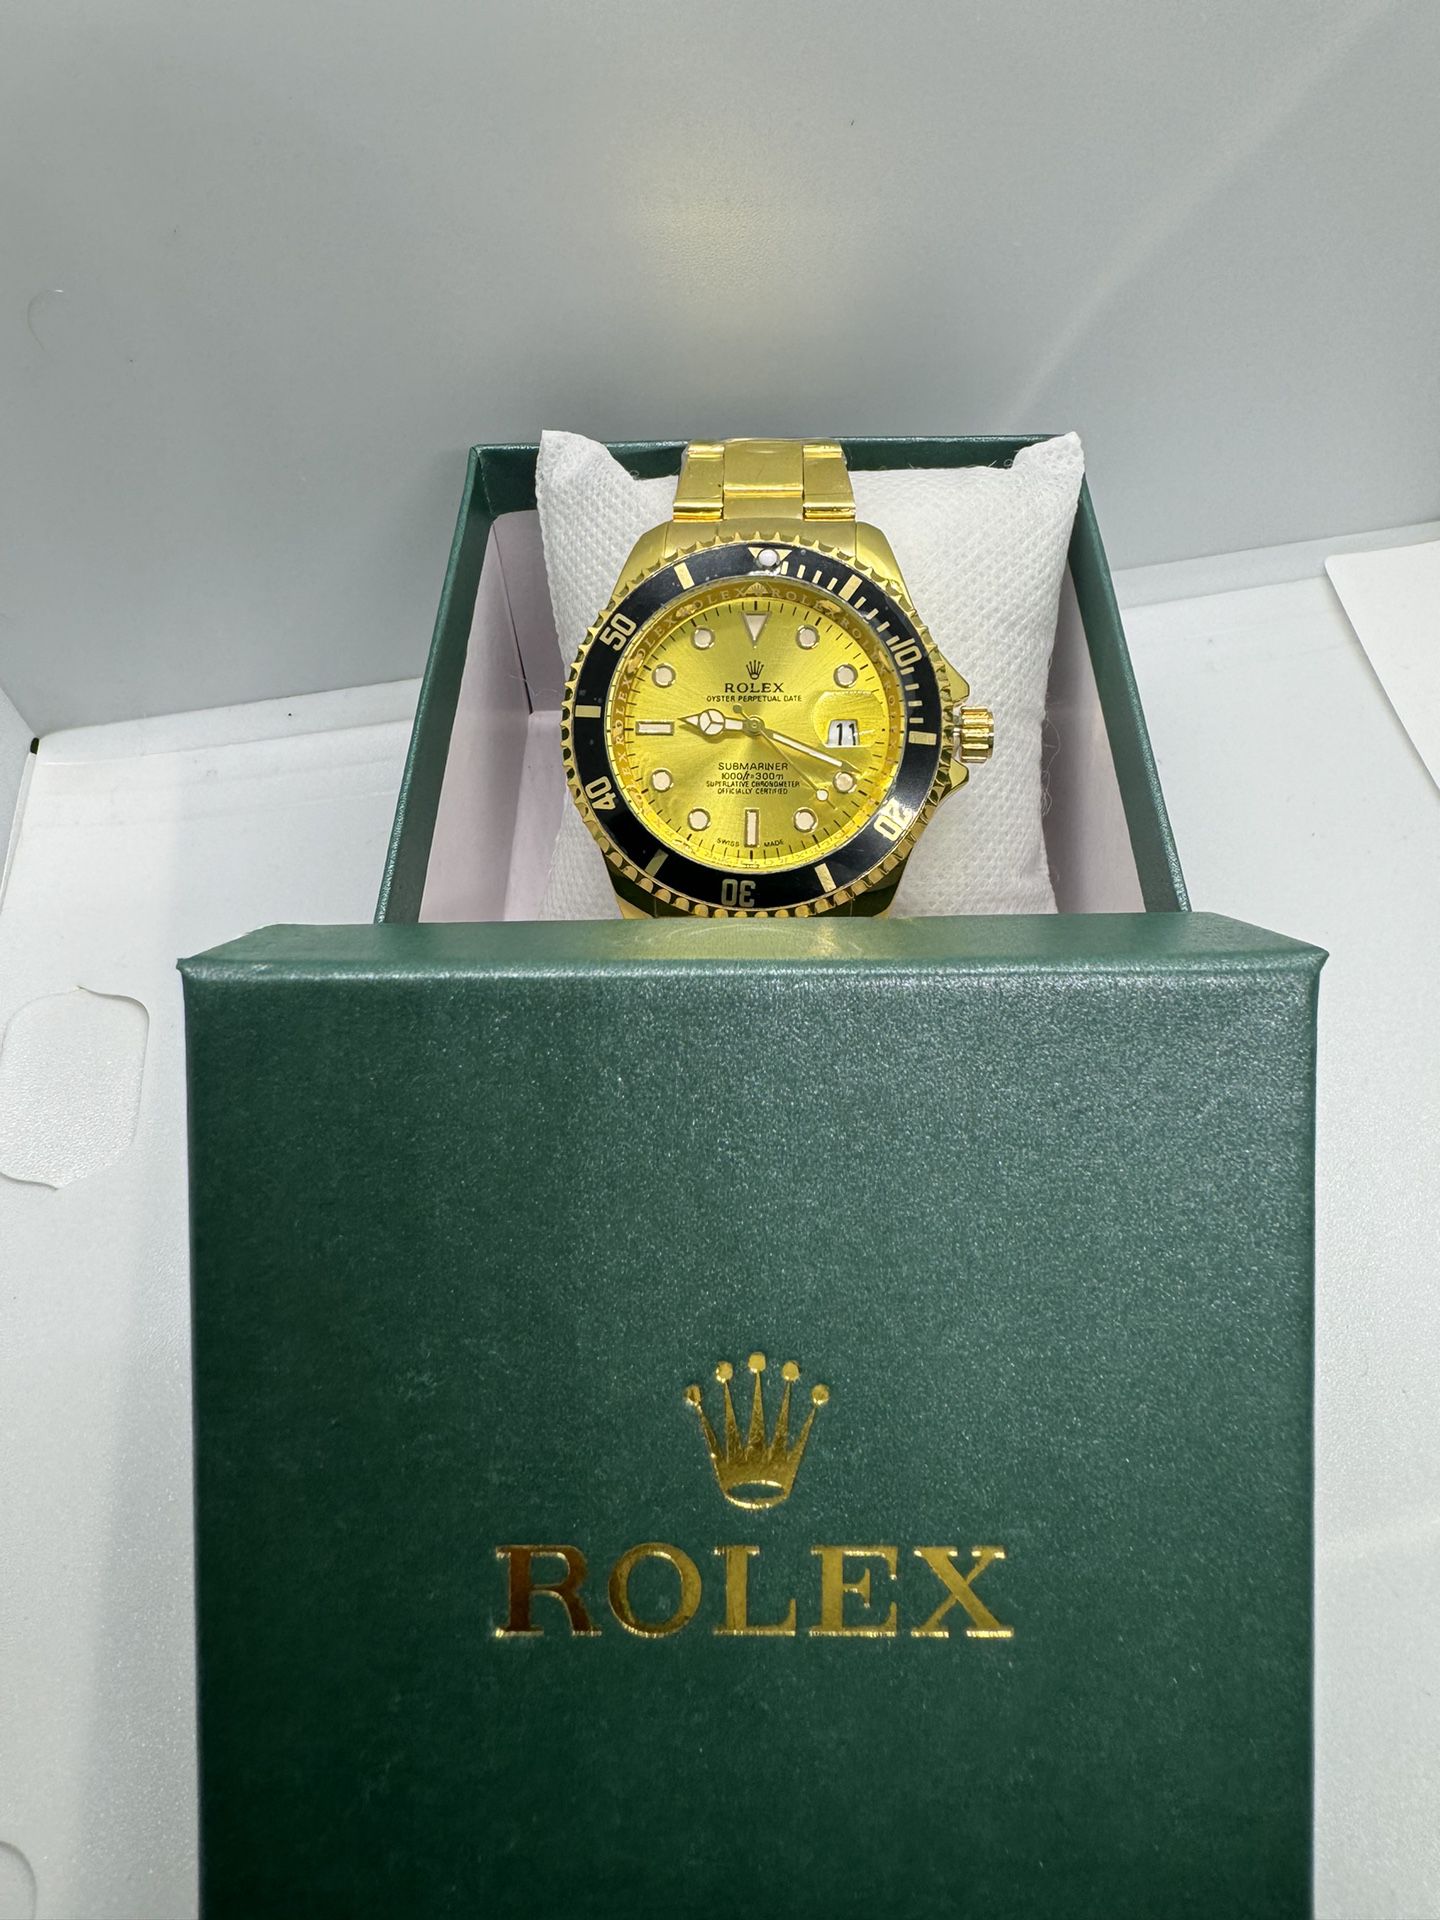 Brand New Gold Face / Black Bezel / Gold Band Designer Watch With Box! 